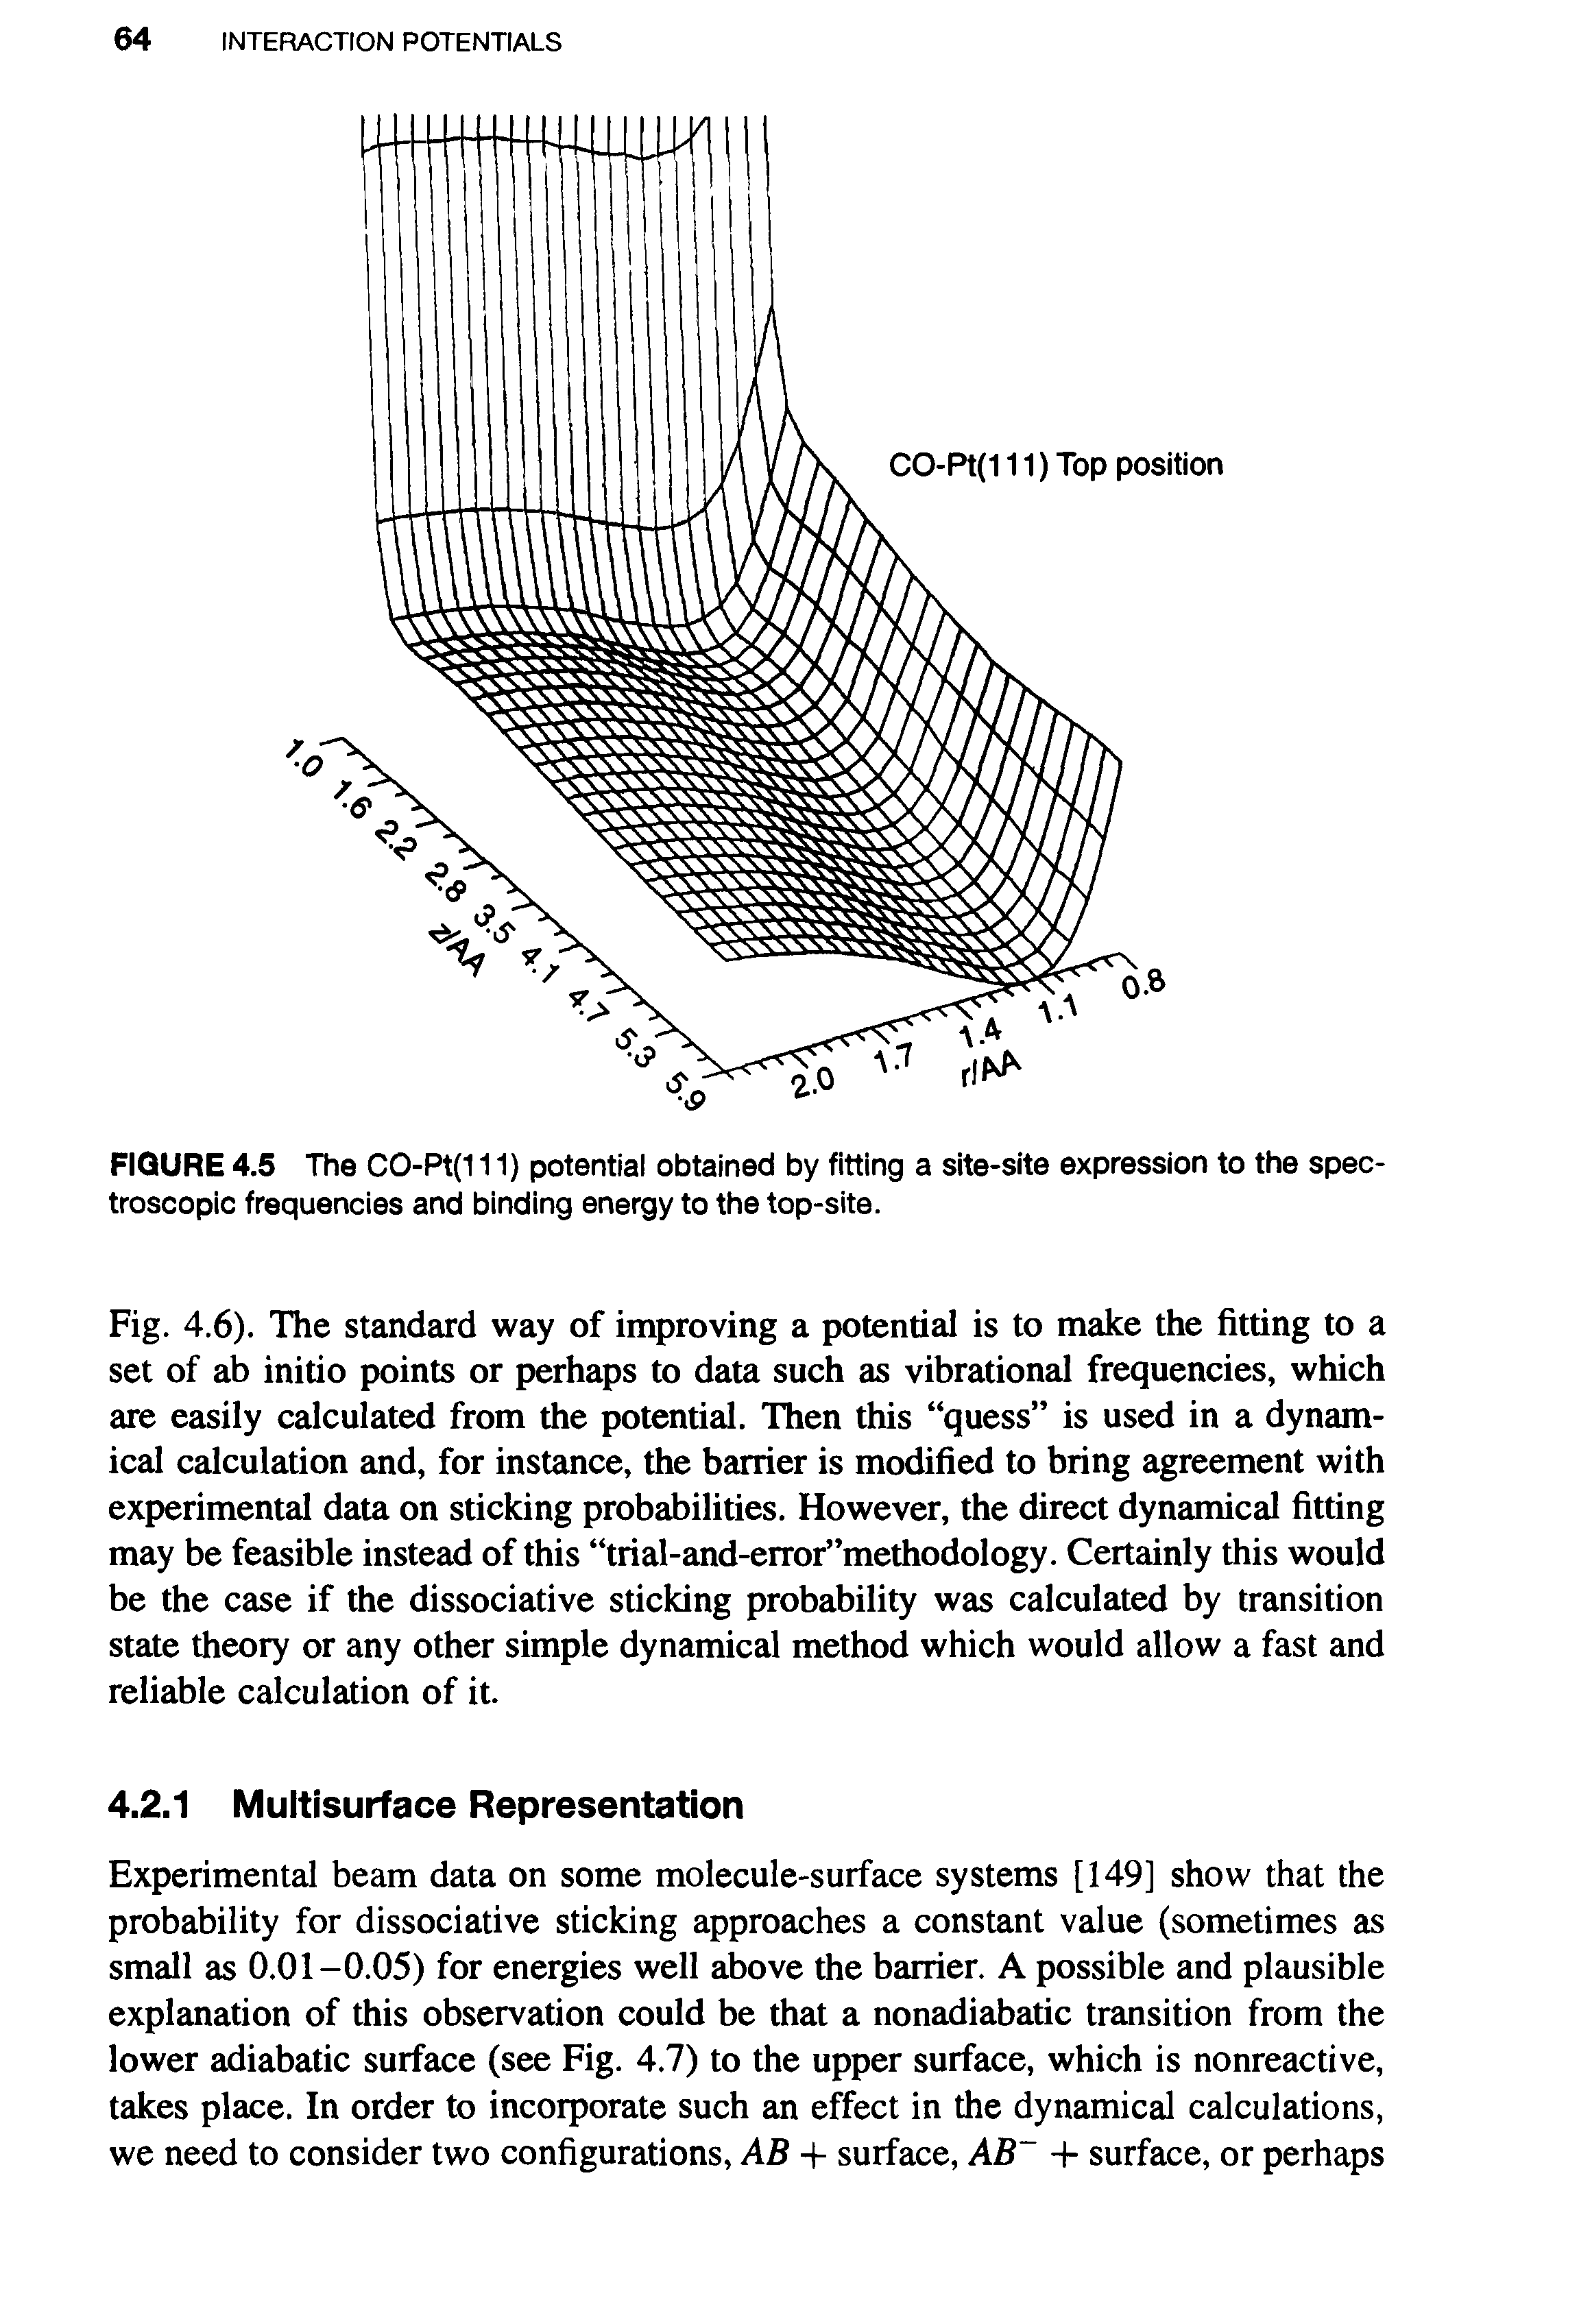 Fig. 4.6). The standard way of improving a potential is to make the fitting to a set of ab initio points or perhaps to data such as vibrational frequencies, which are easily calculated from the potential. Then this quess is used in a dynamical calculation and, for instance, the barrier is modified to bring agreement with experimental data on sticking probabilities. However, the direct dynamical fitting may be feasible instead of this trial-and-error methodology. Certainly this would be the case if the dissociative sticking probability was calculated by transition state theory or any other simple dynamical method which would allow a fast and reliable calculation of it.